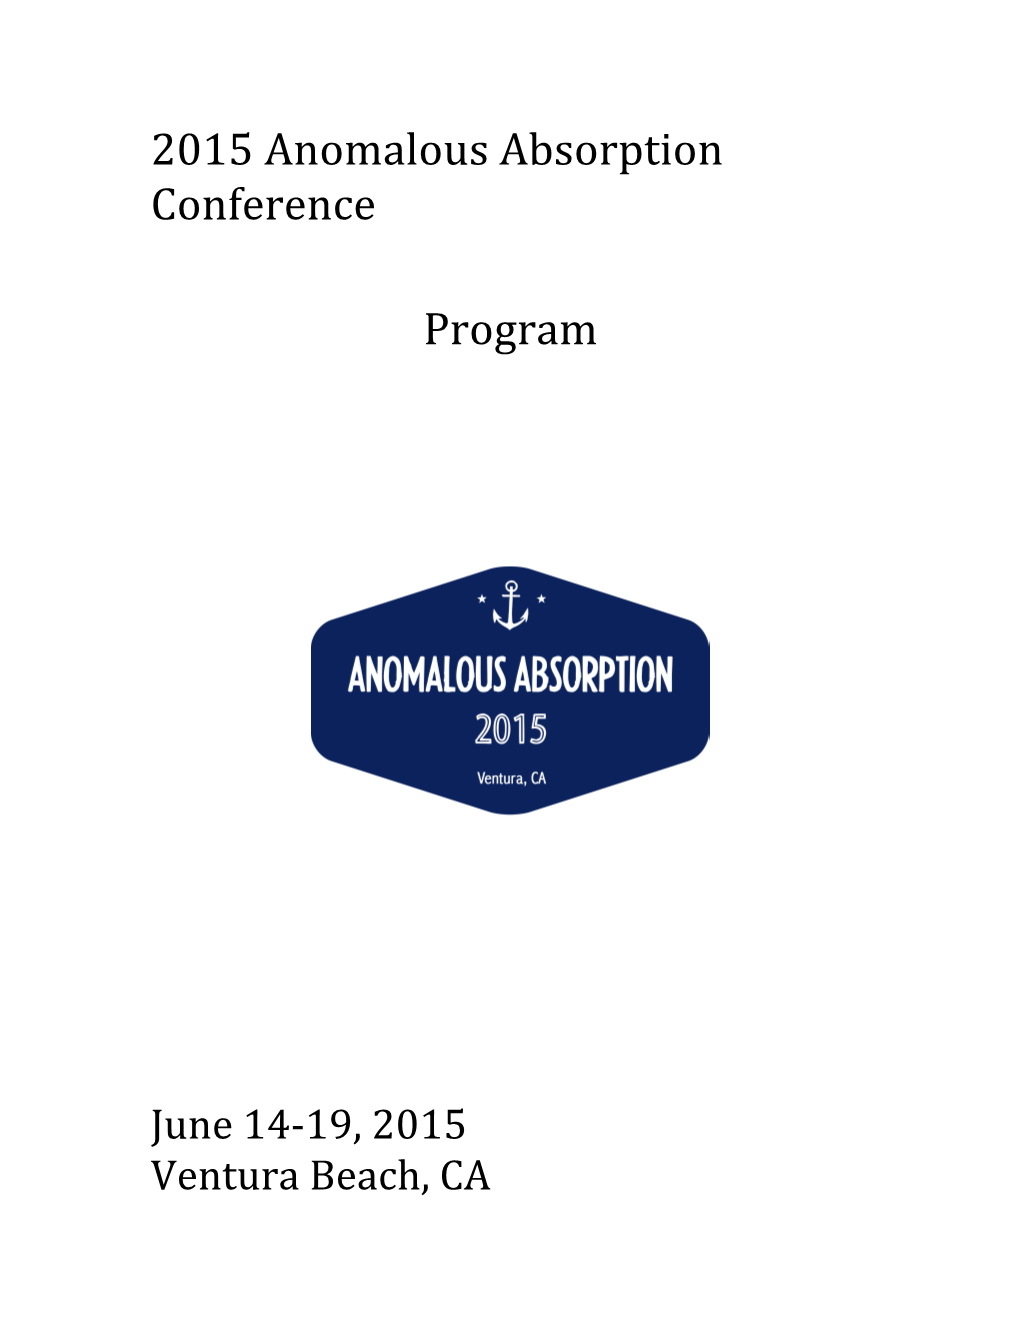 2015 Anomalous Absorption Conference Program